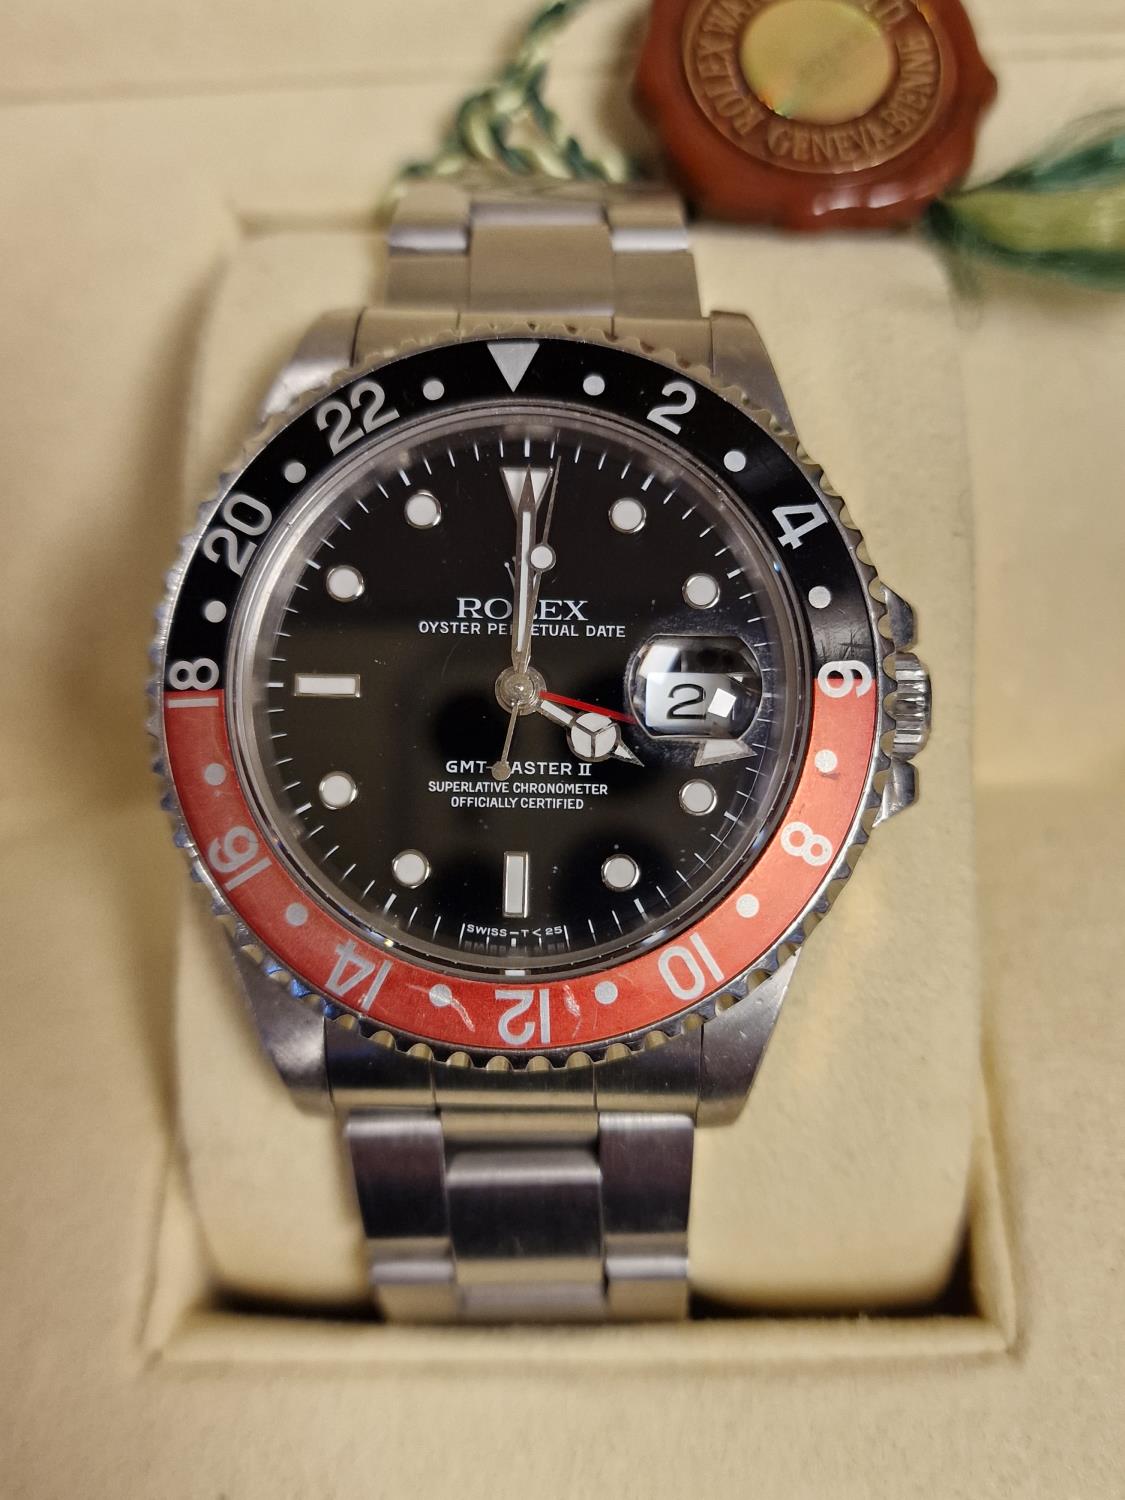 Boxed Rolex GMT II Chronometer Oyster Wrist Watch - Boxed with some paperwork - Image 2 of 11